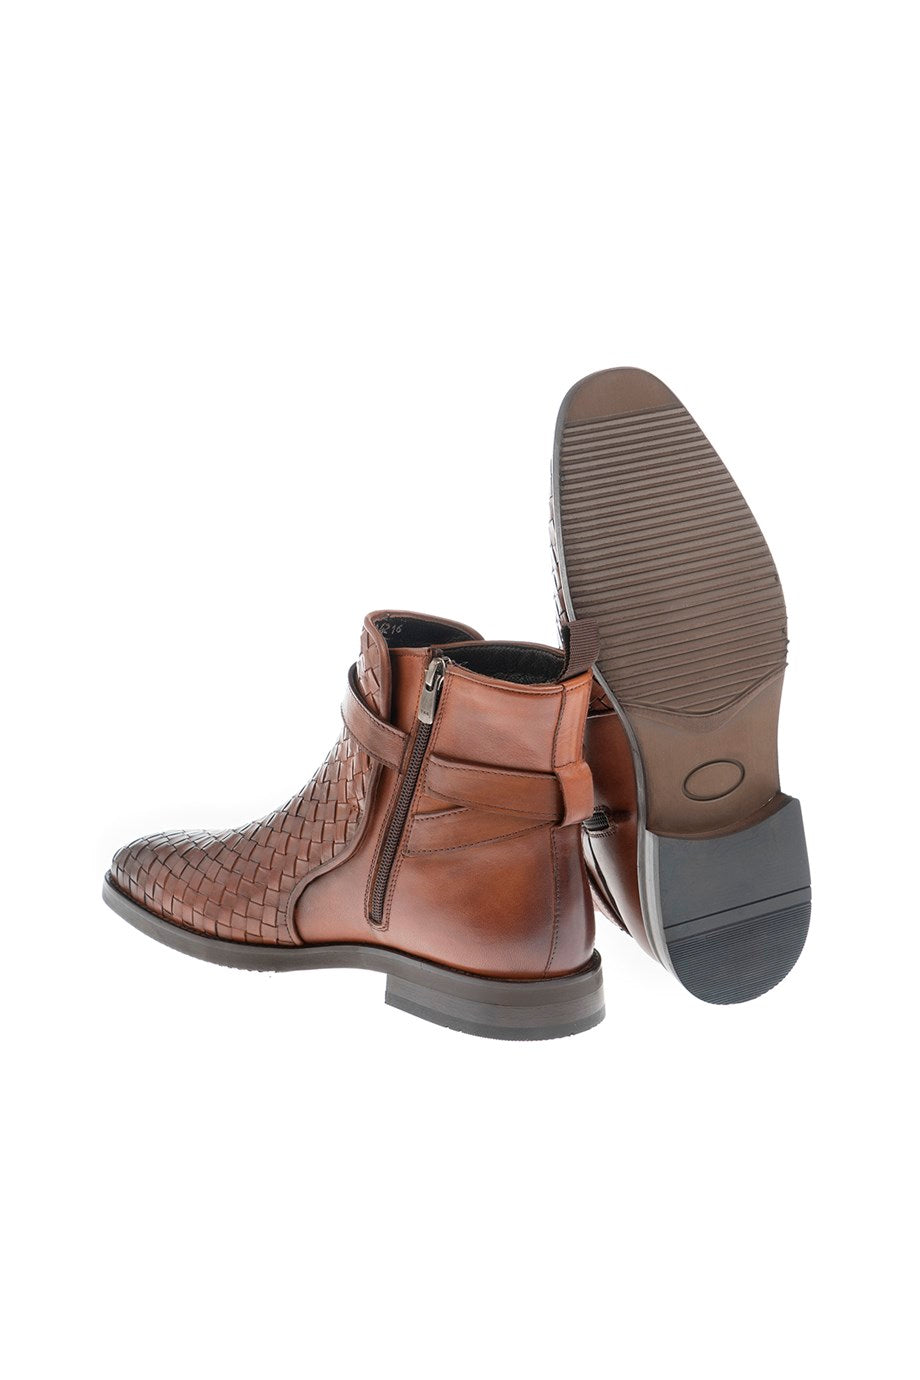 Special Design Chelsea Boots - MENSTYLEWITH